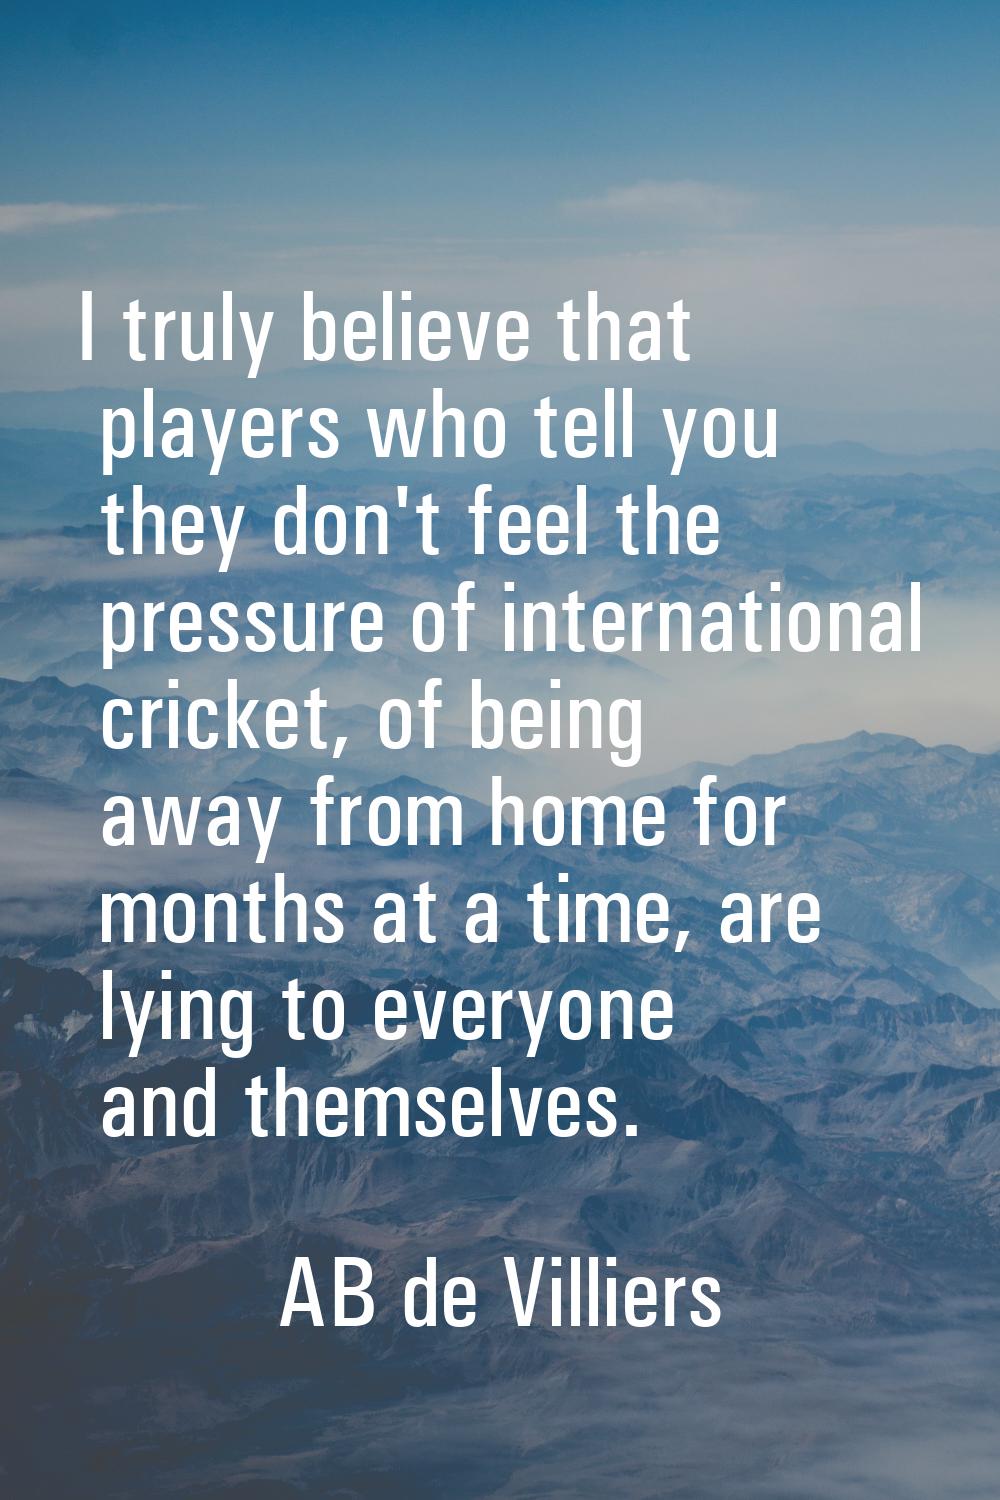 I truly believe that players who tell you they don't feel the pressure of international cricket, of